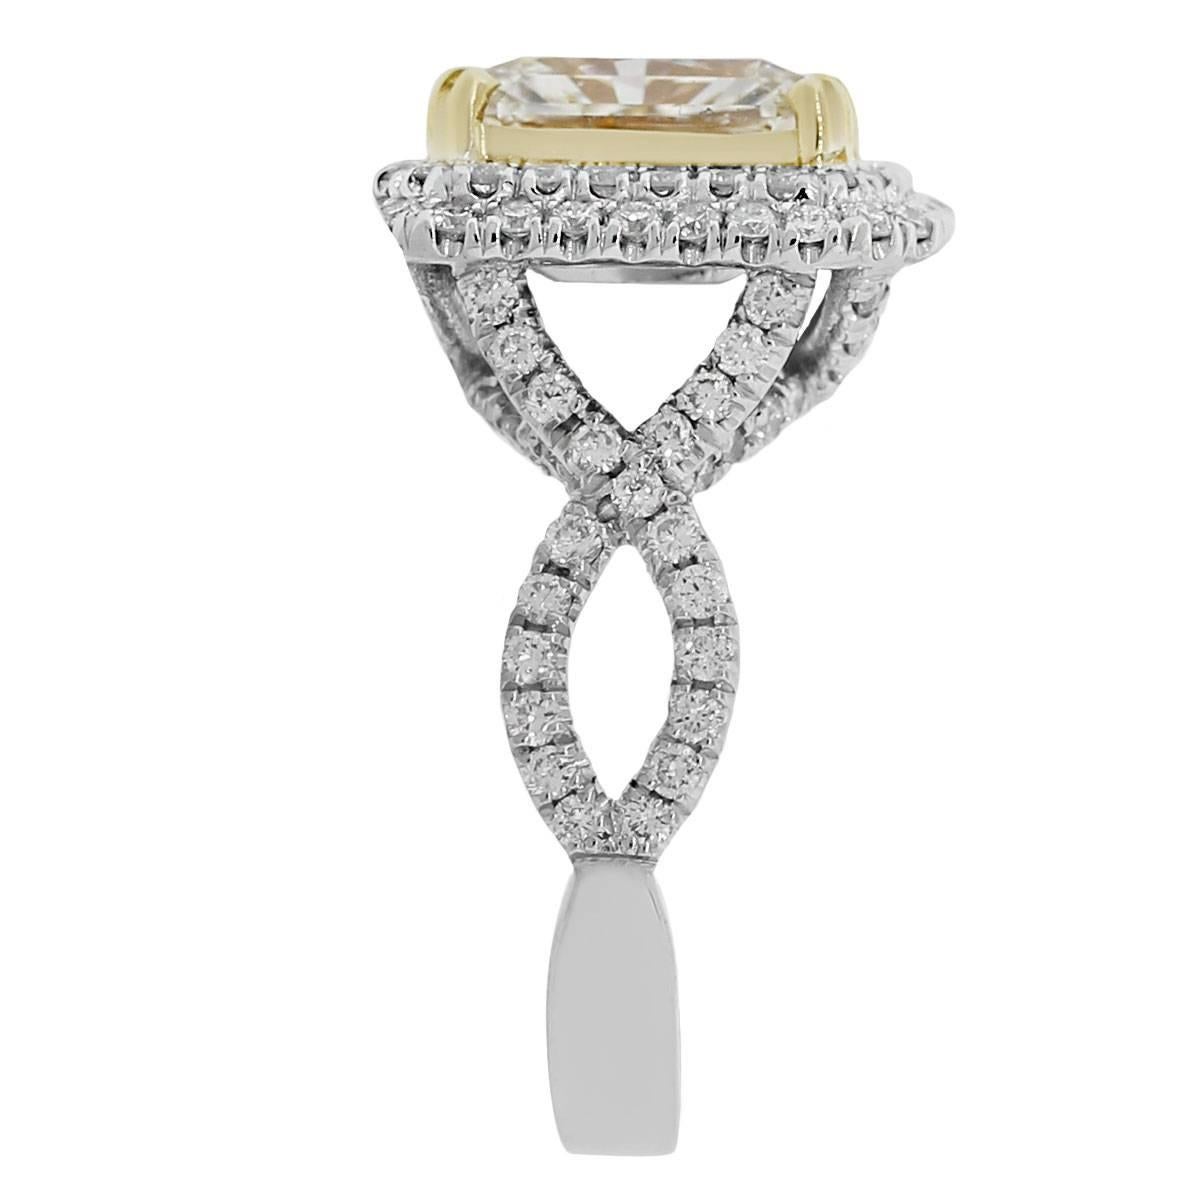 Material: 18k yellow and white gold
Style: Fancy yellow diamond ring
Center Diamond Details: Approximately 3.01ct radiant cut fancy yellow diamond.
Diamond Details: Approximately 1.58ctw accent round brilliant cut diamonds. Diamonds are G/H in color